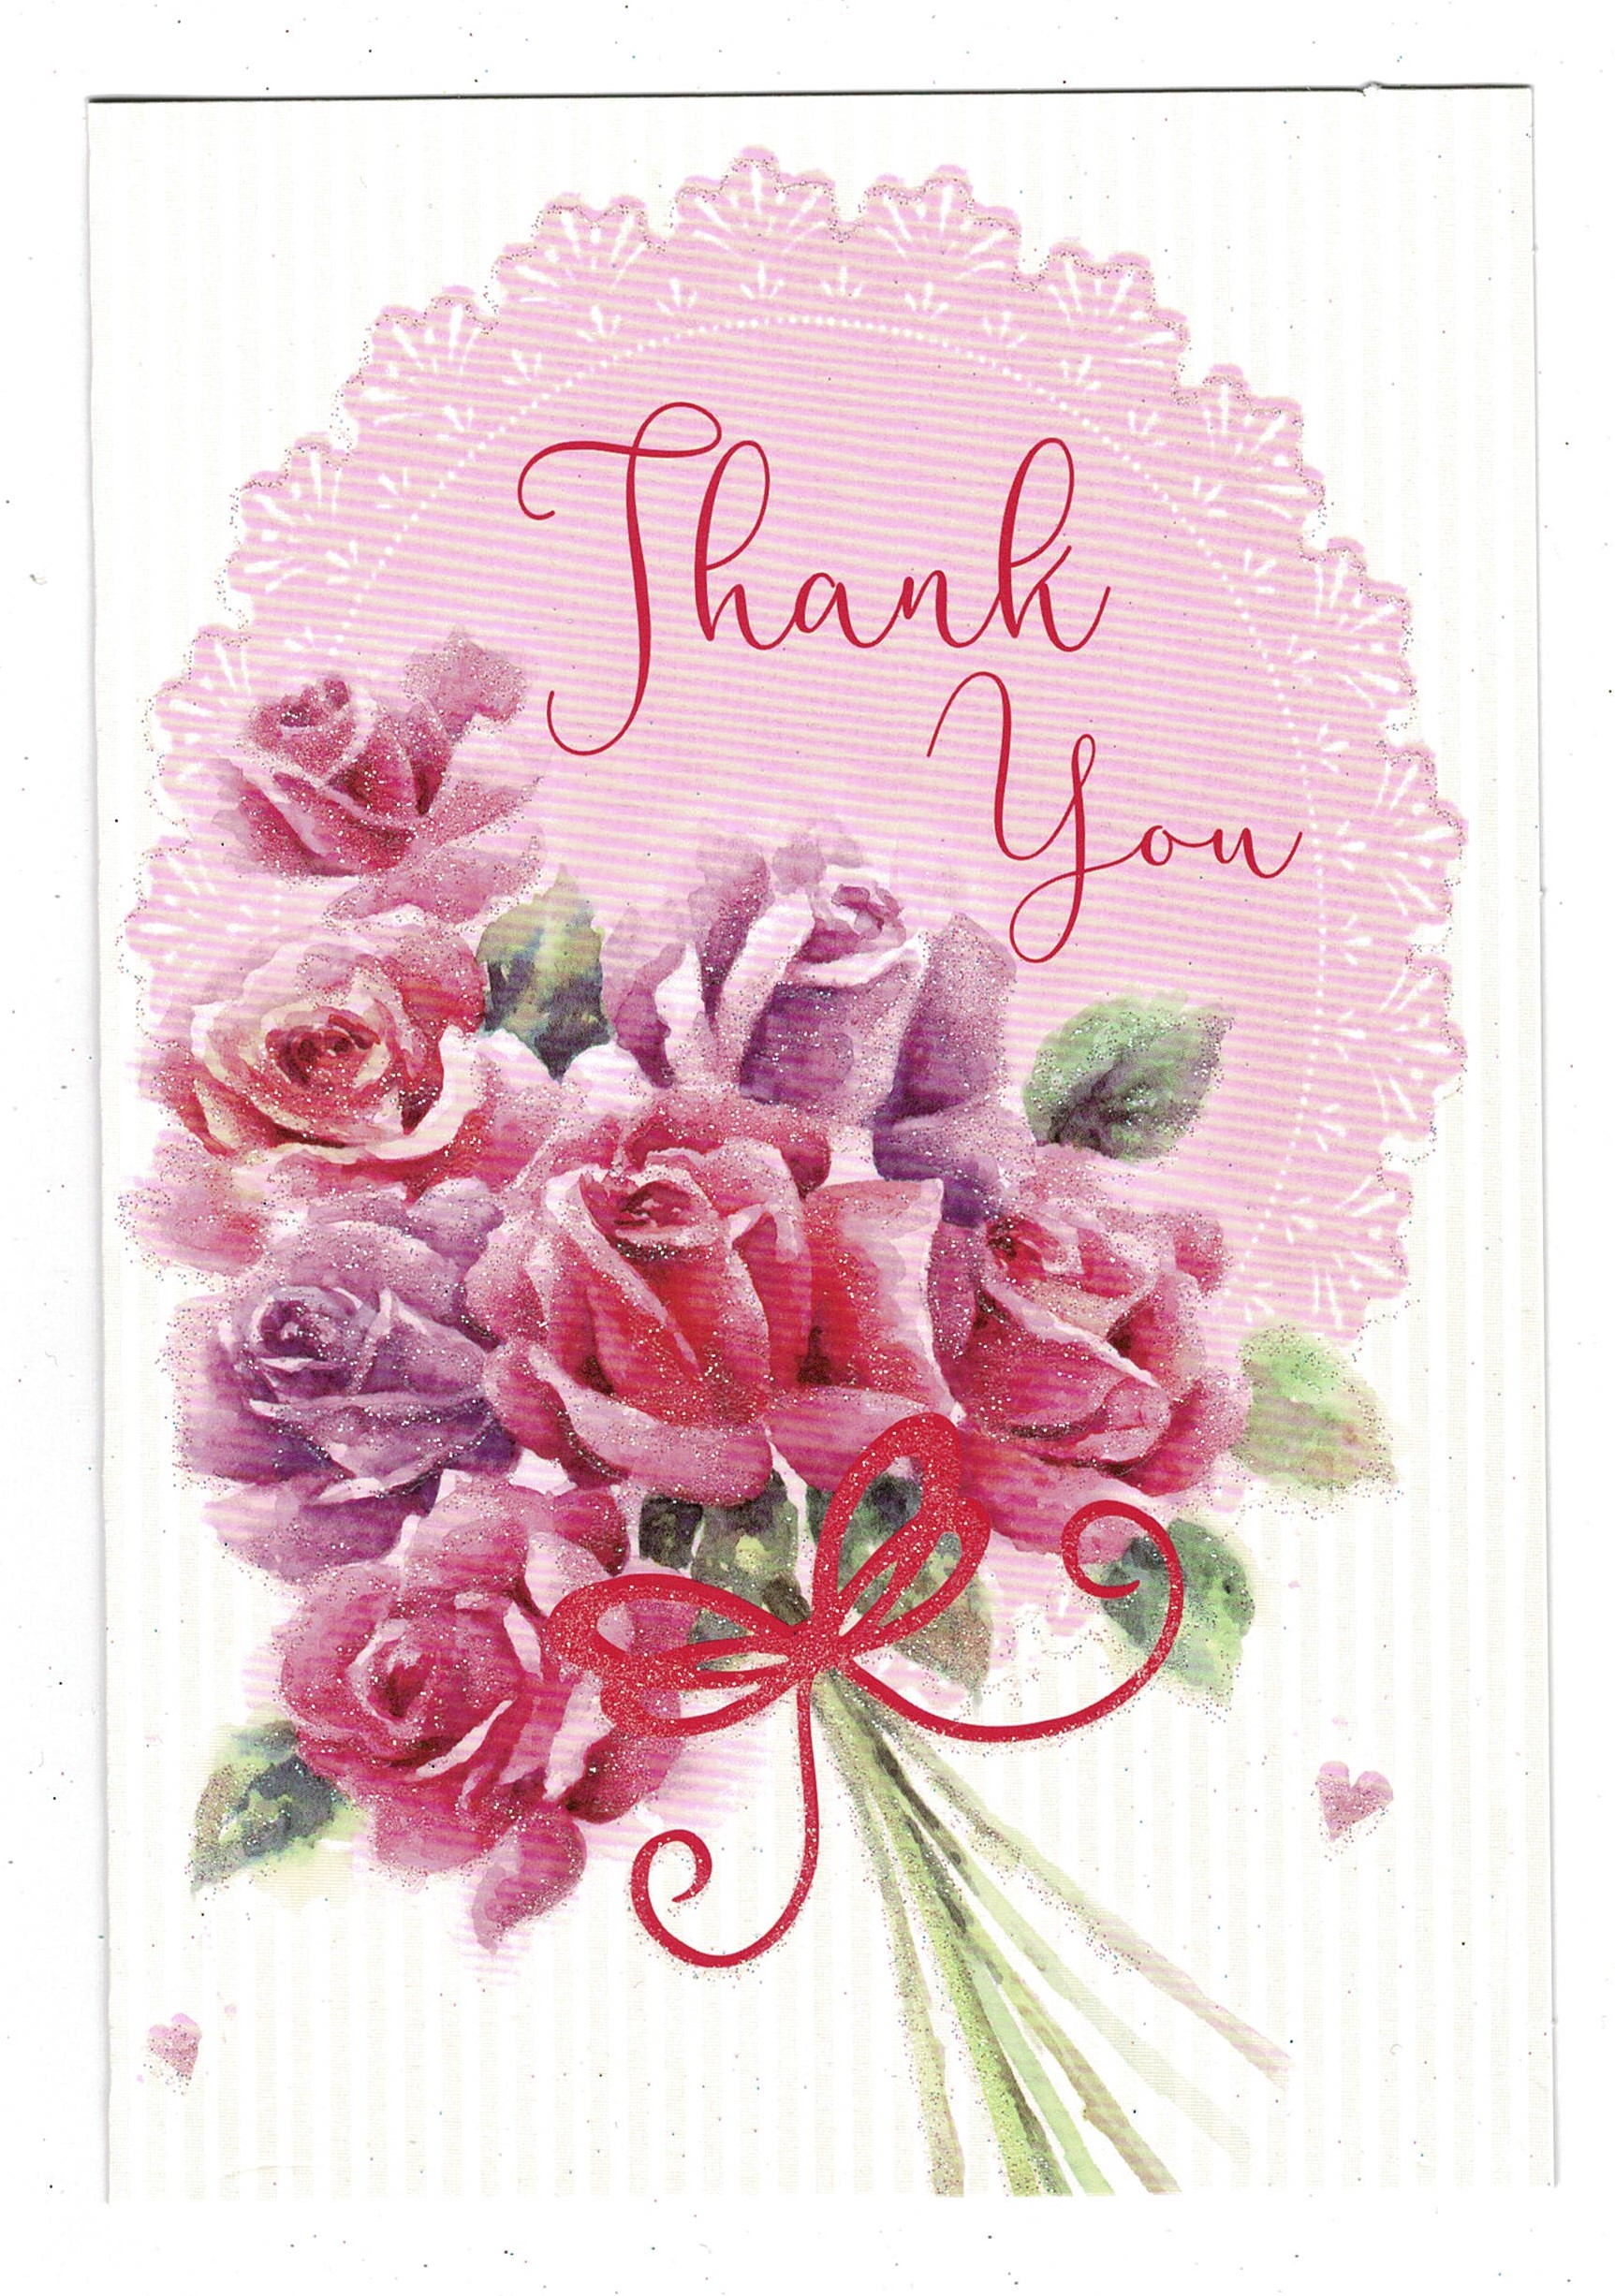 Thank you Card 'Thank You' With Floral Glitter Design - With Love Gifts ...